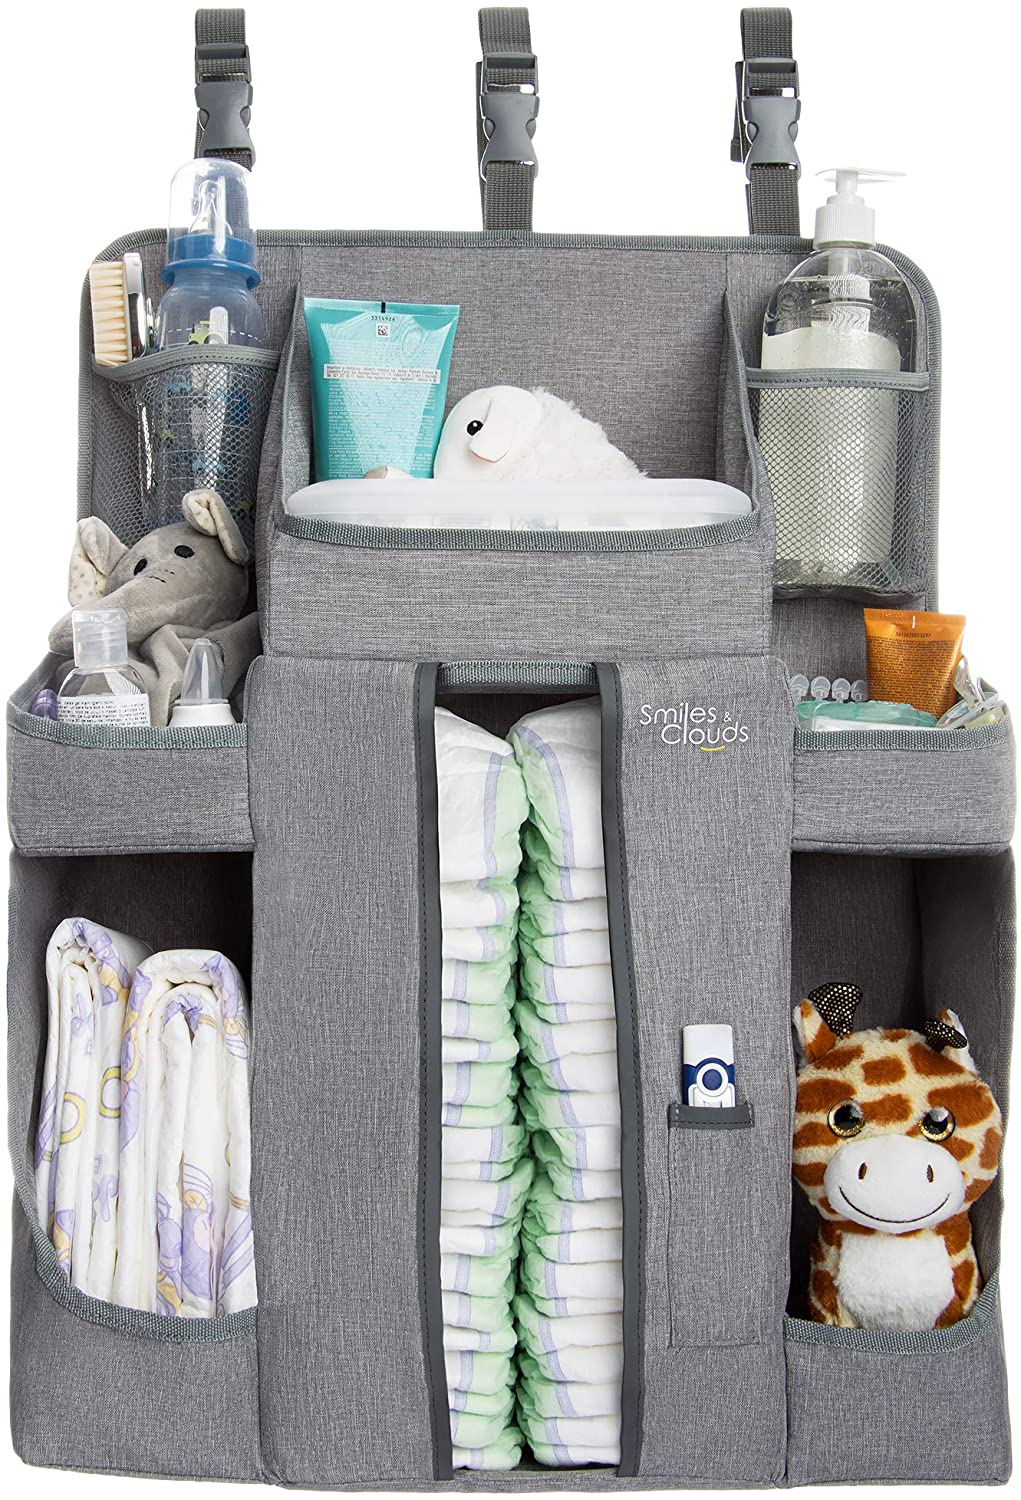 9 Diaper Caddy for Dispensing Baby Pads Quickly and Easily | Storables